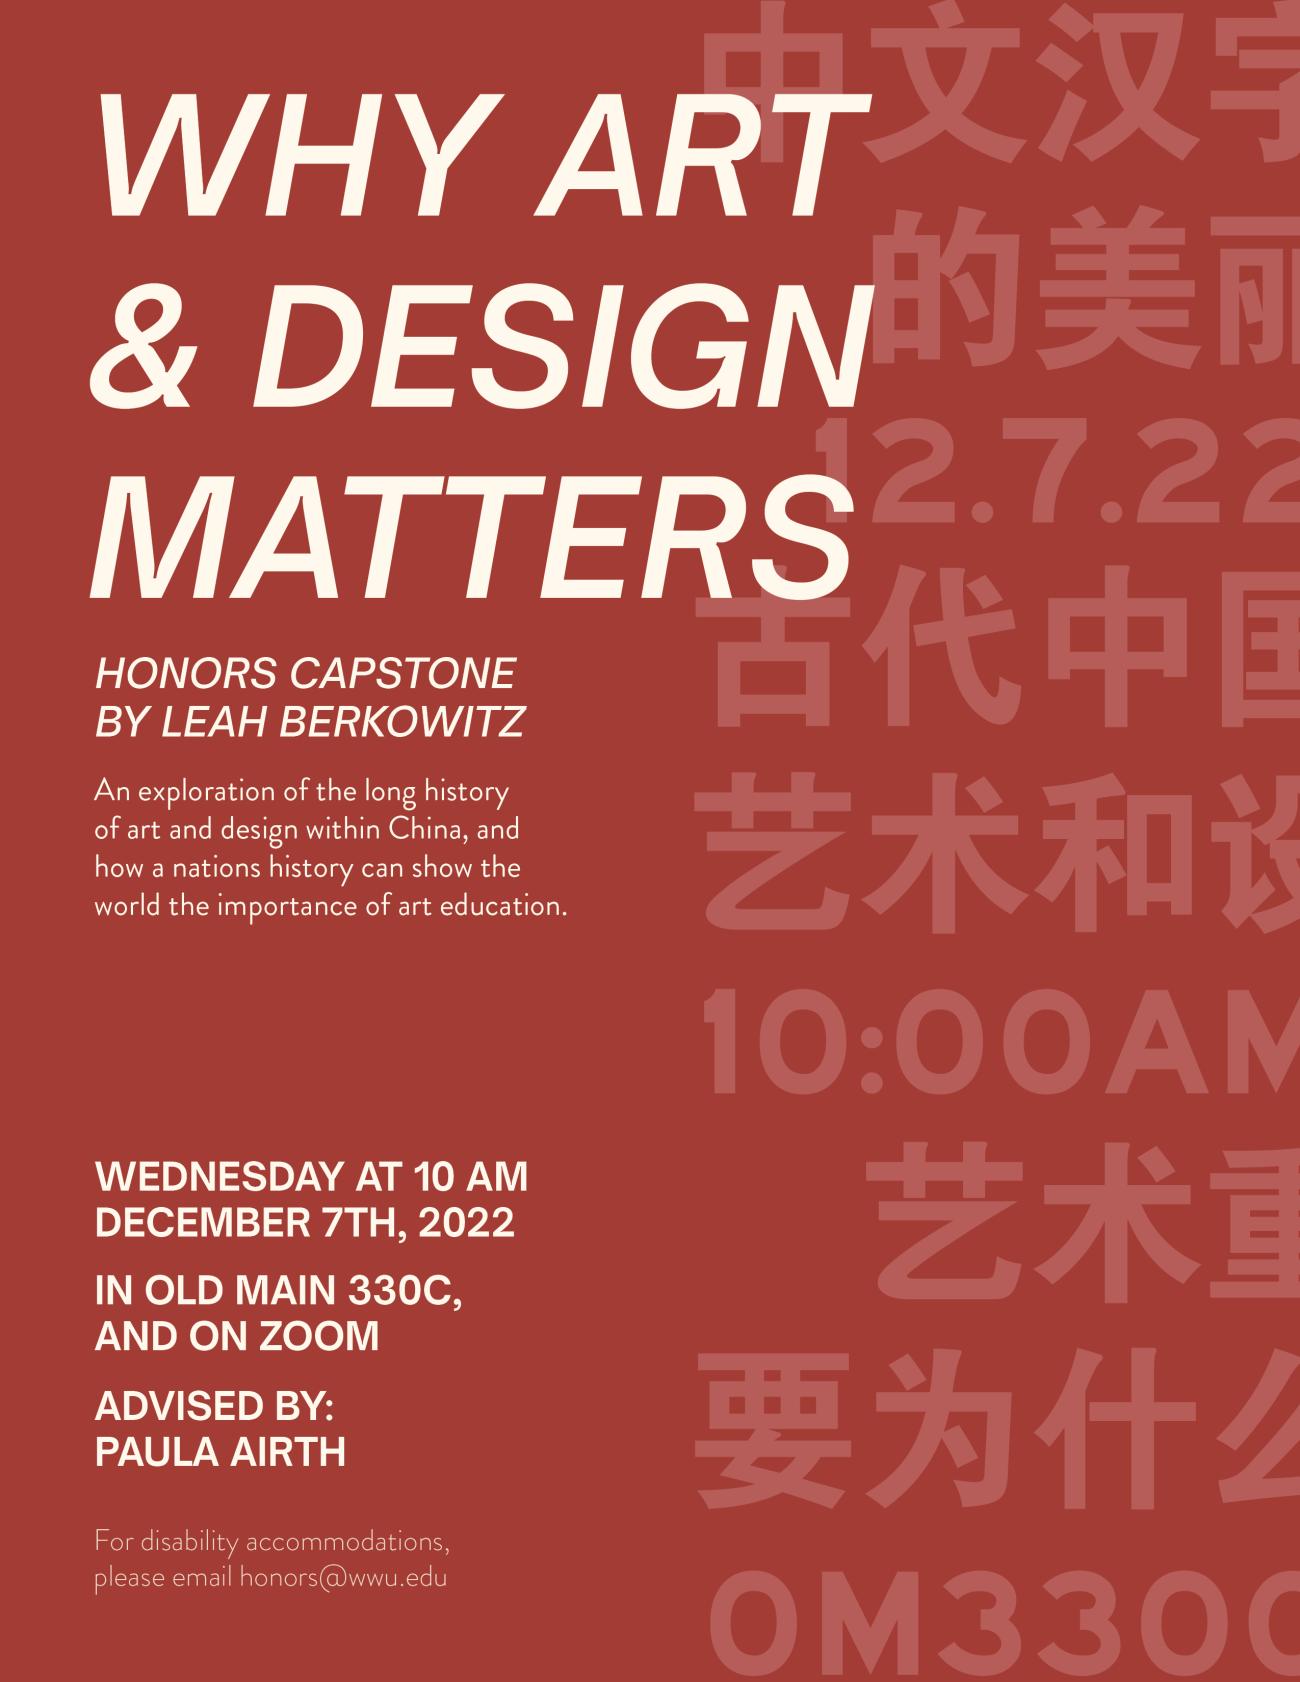 A poster advertising an honors capstone project by Leah Berkowitz titled: Why art and design matters: an exploration of the long history of art and design within China, and how a nation's history can show the world the importance of art education. Presentation is Thursday at 2PM, in Old Main 330C and on Zoom. Advised by Paula Airth. For disability accommodations, please email honors@wwu.edu. 